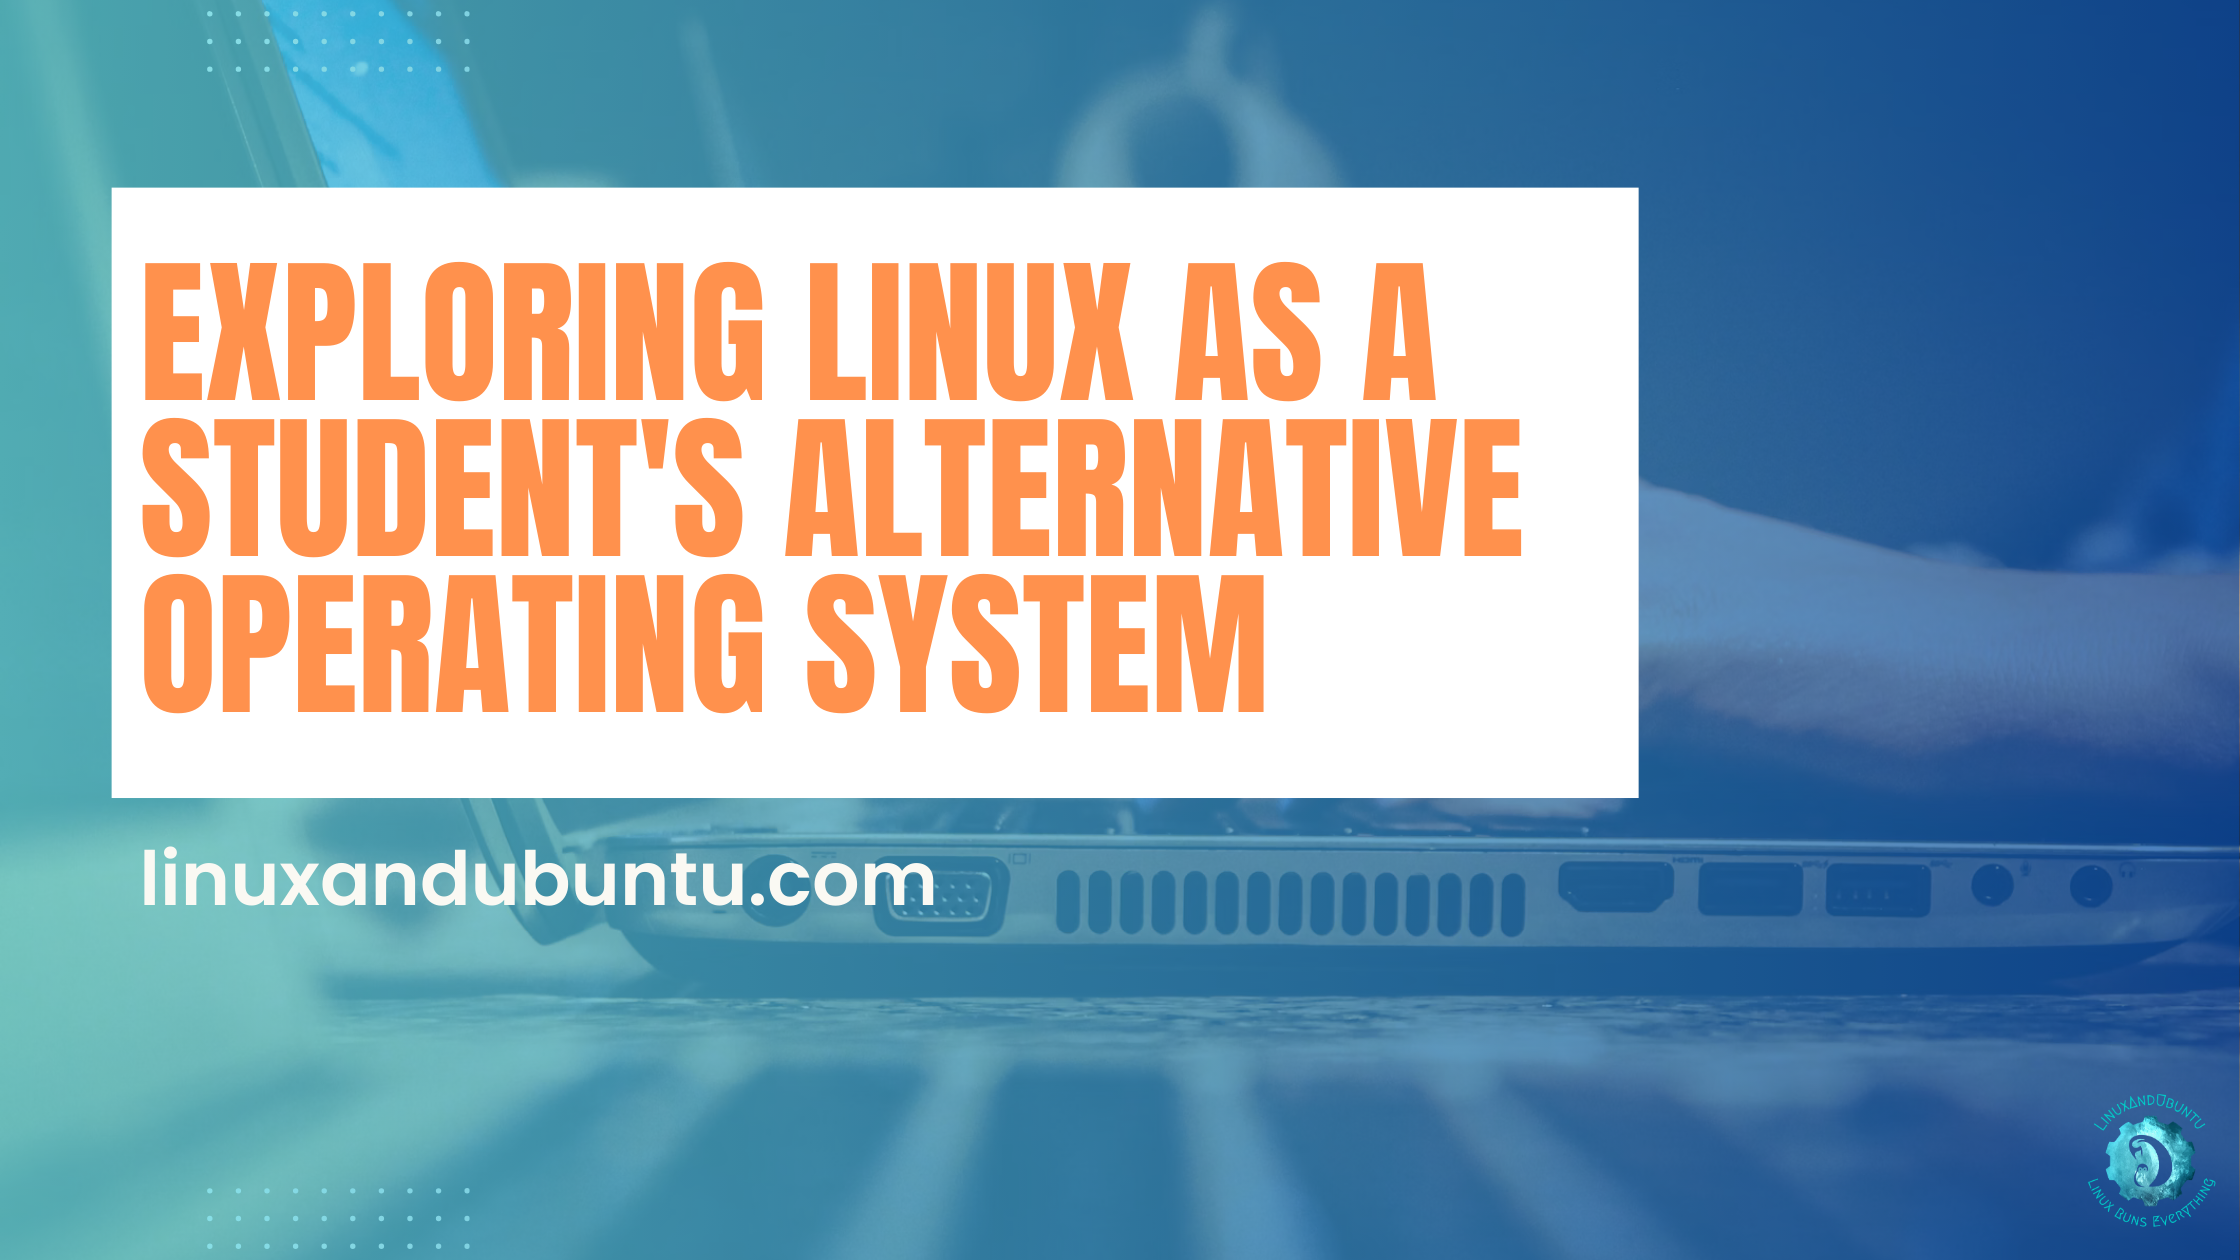 Exploring Linux as a Student's Alternative Operating System